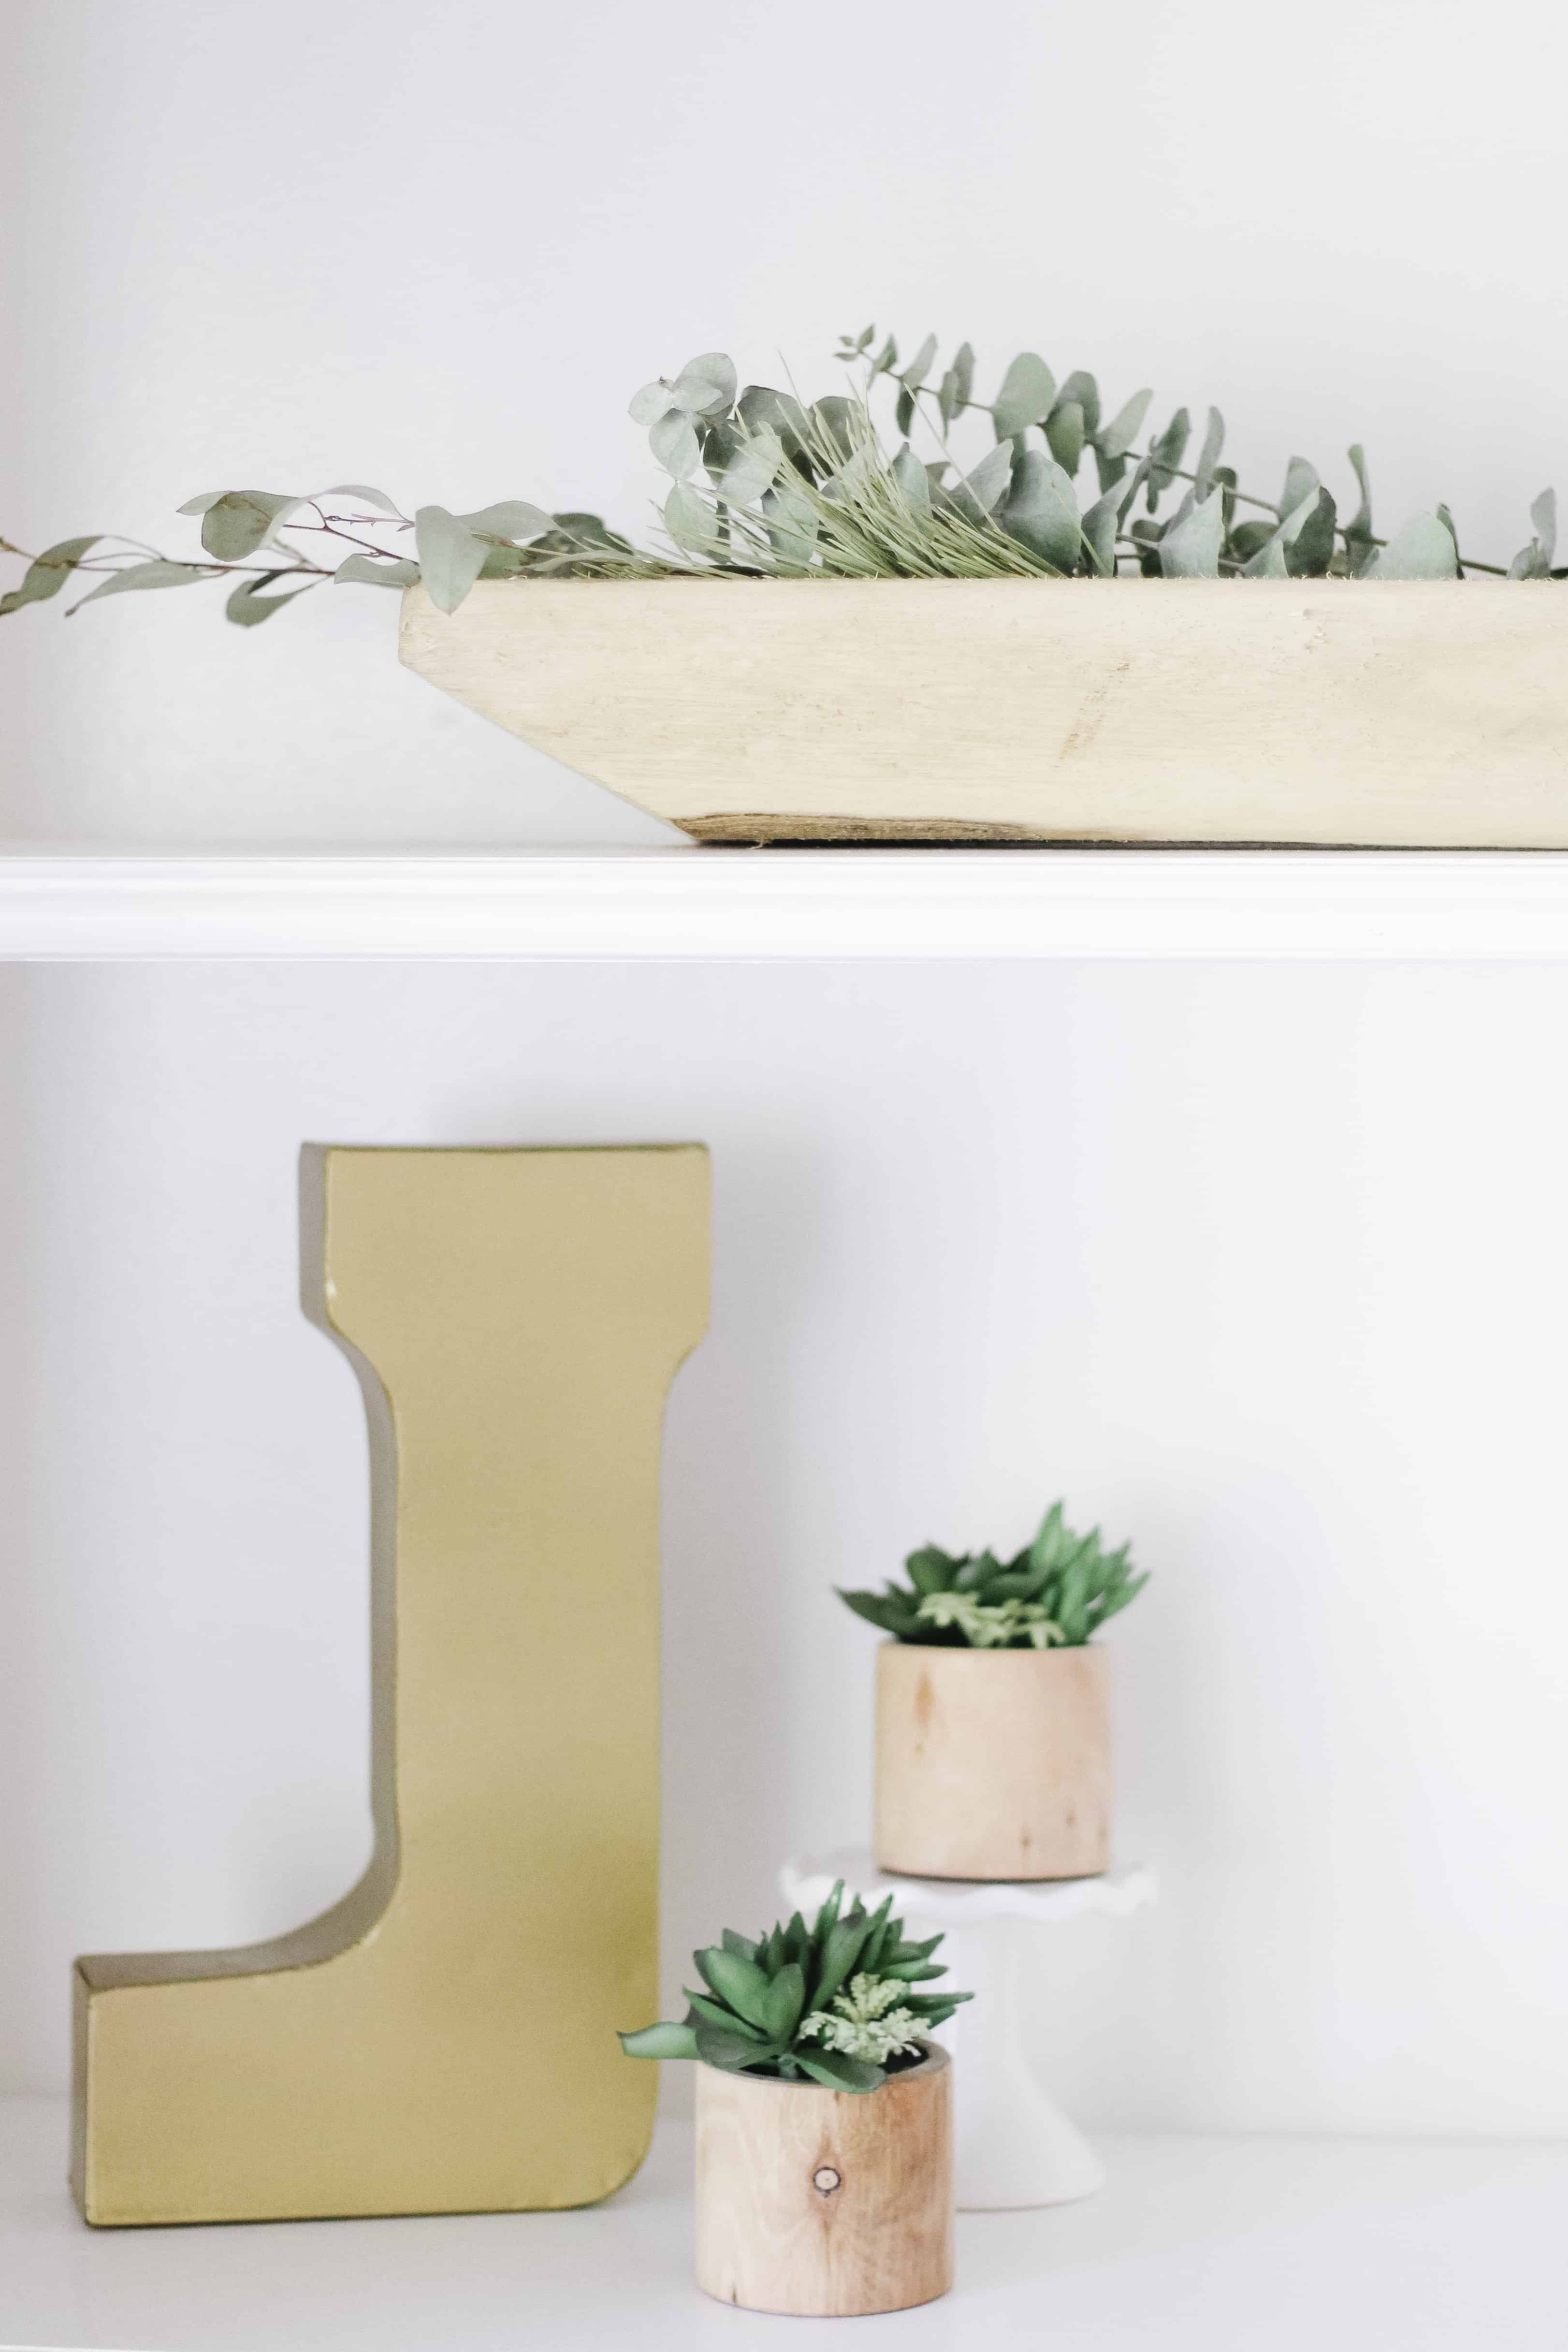 builtin shelving with gold J and wooden and greenery accents